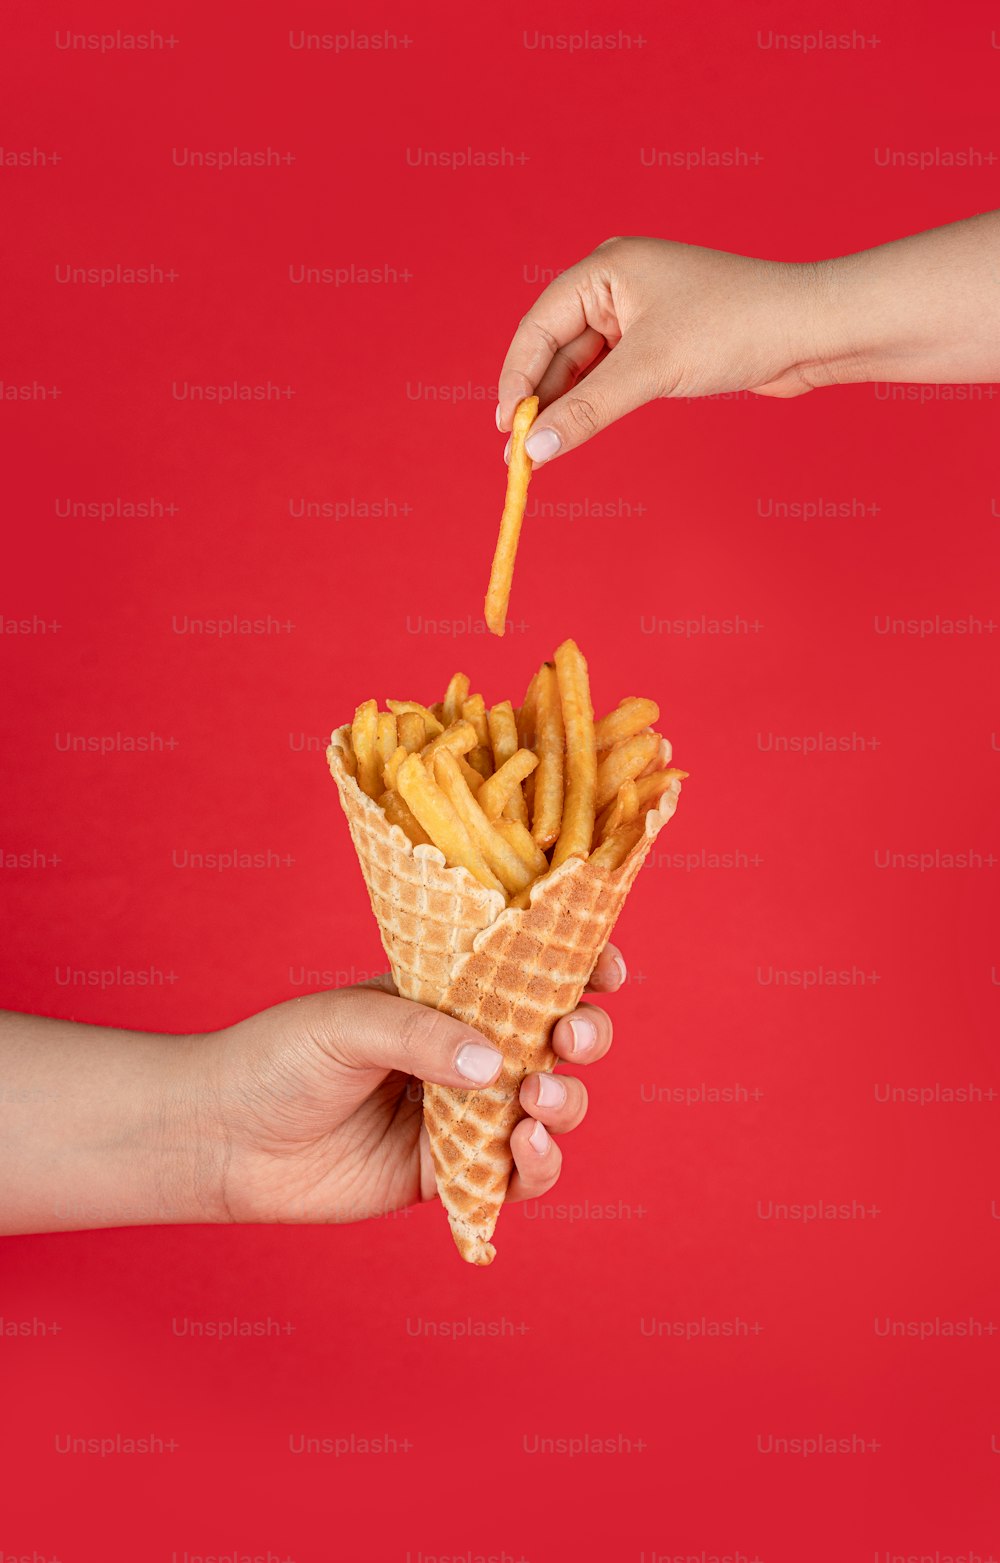 a hand holding a waffle filled with french fries